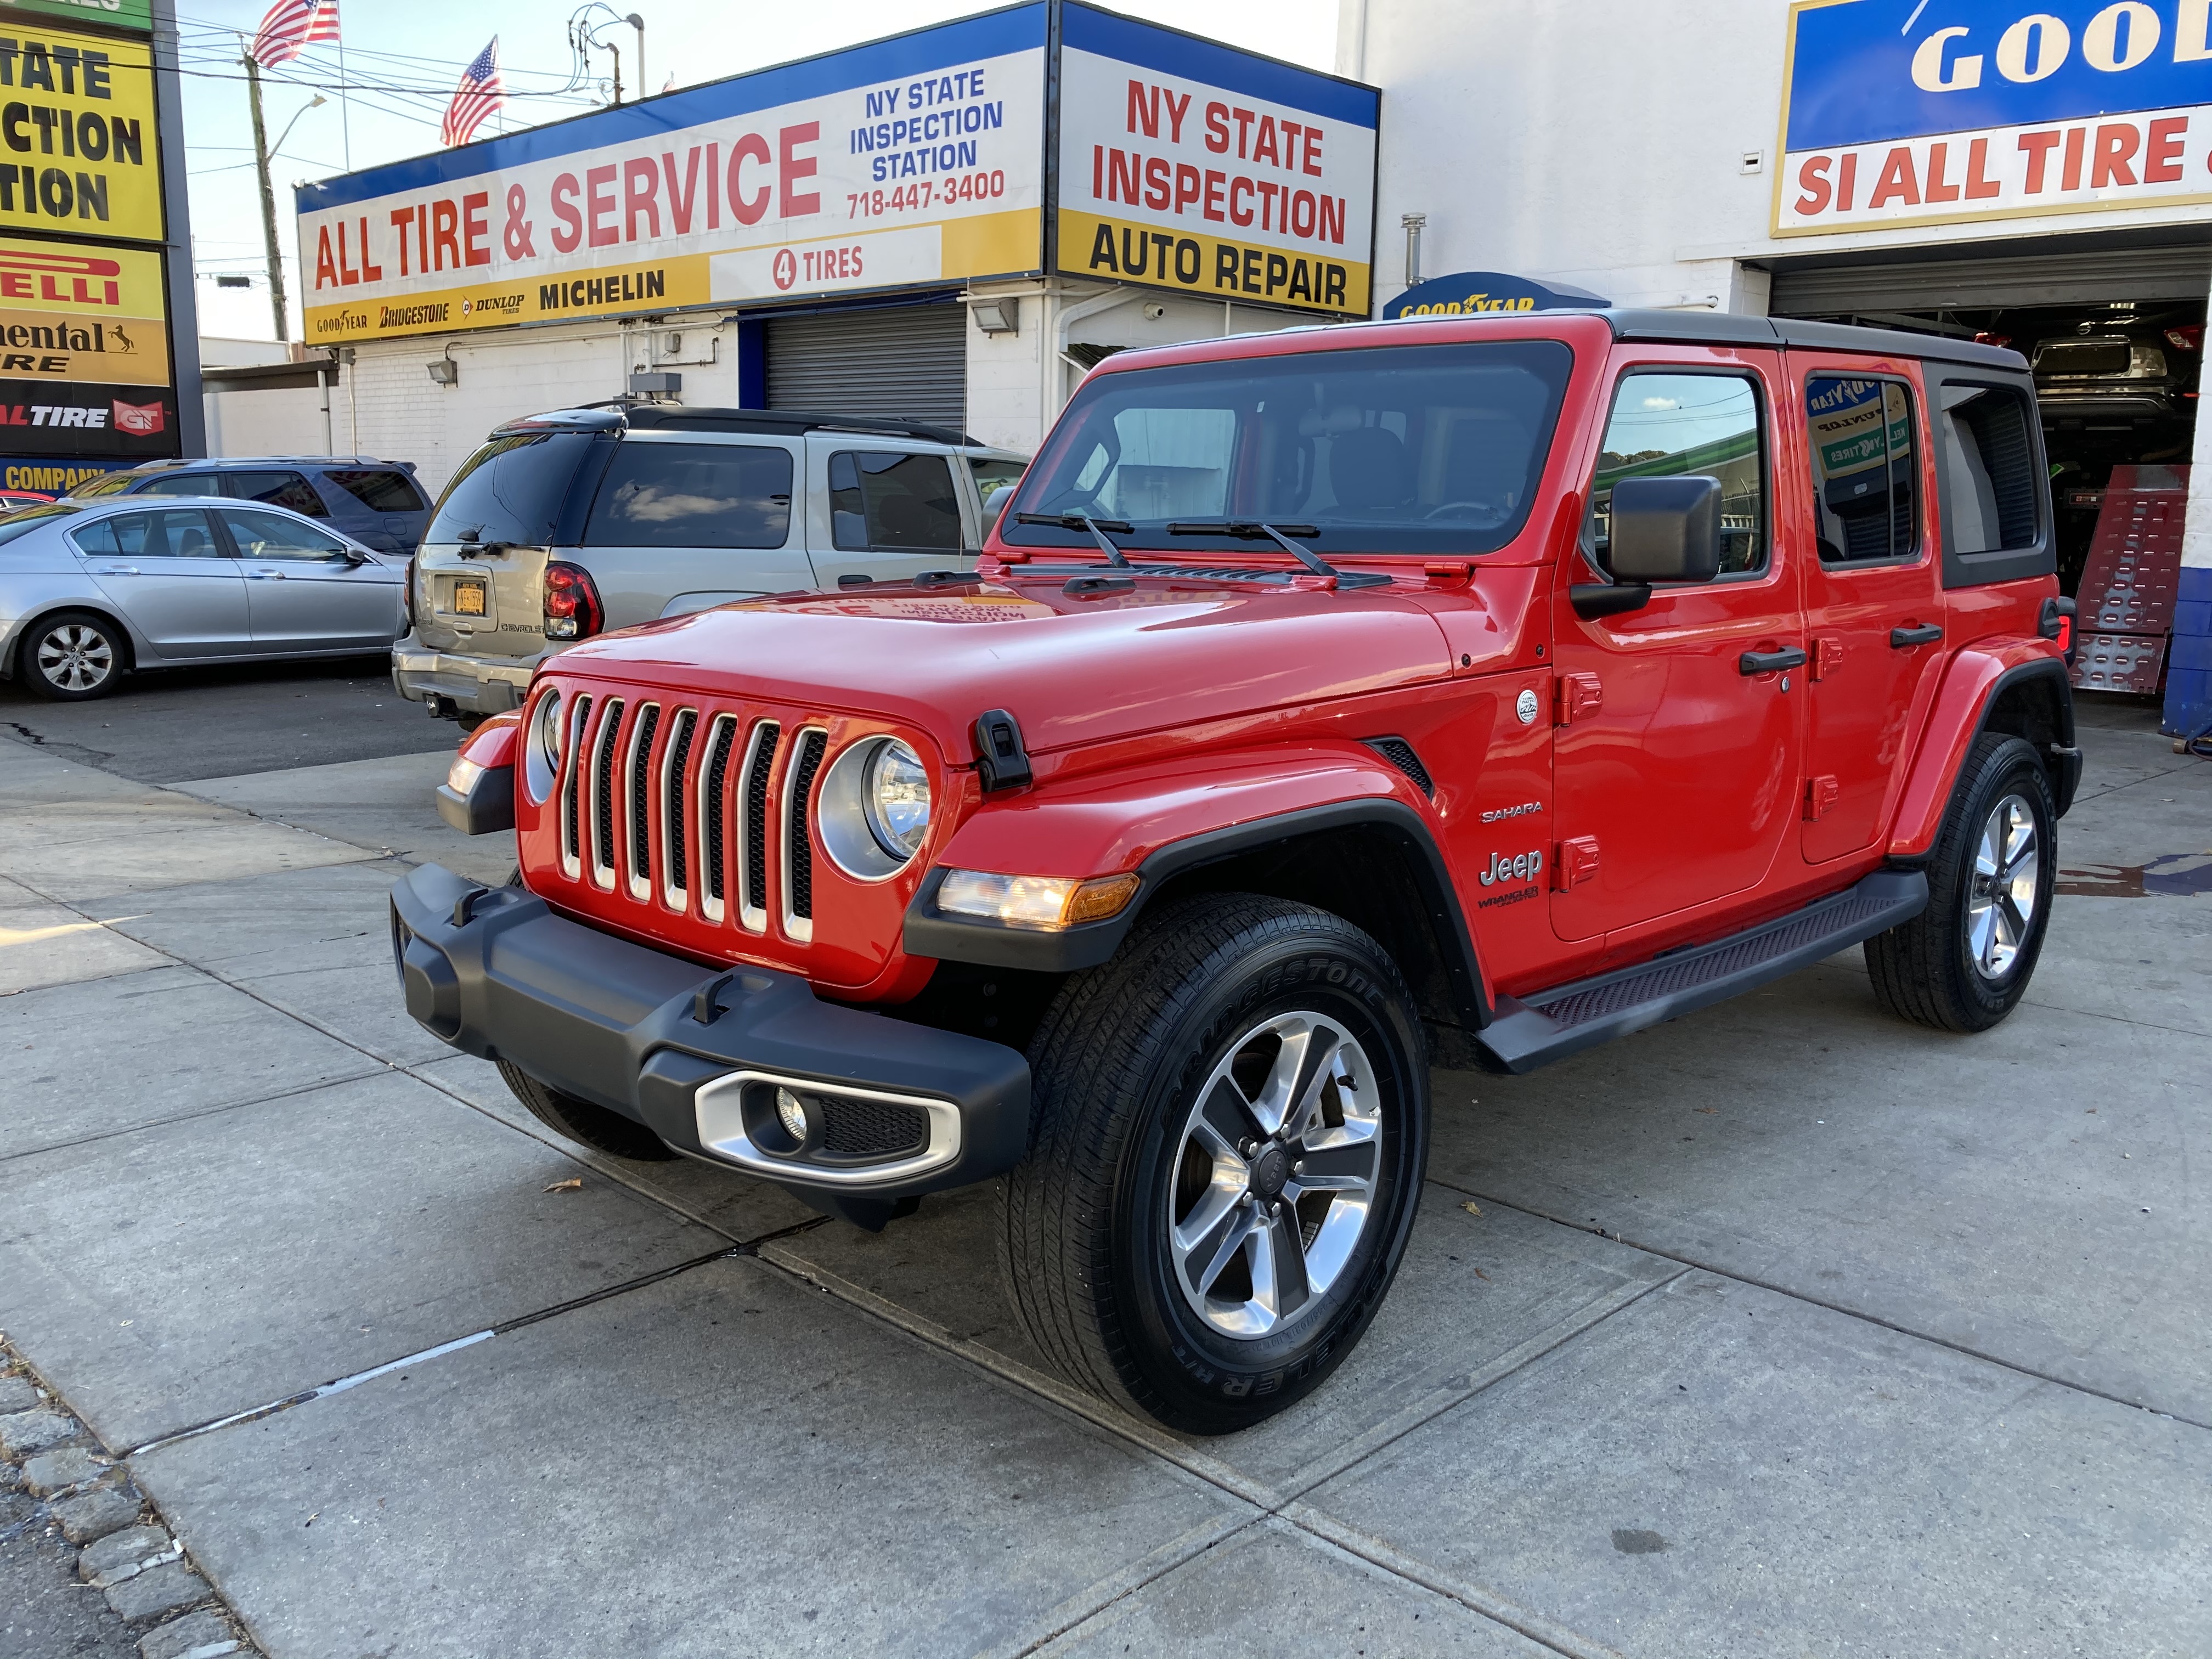 Used Car - 2019 Jeep Wrangler Unlimited Sahara 4x4 for Sale in Staten Island, NY